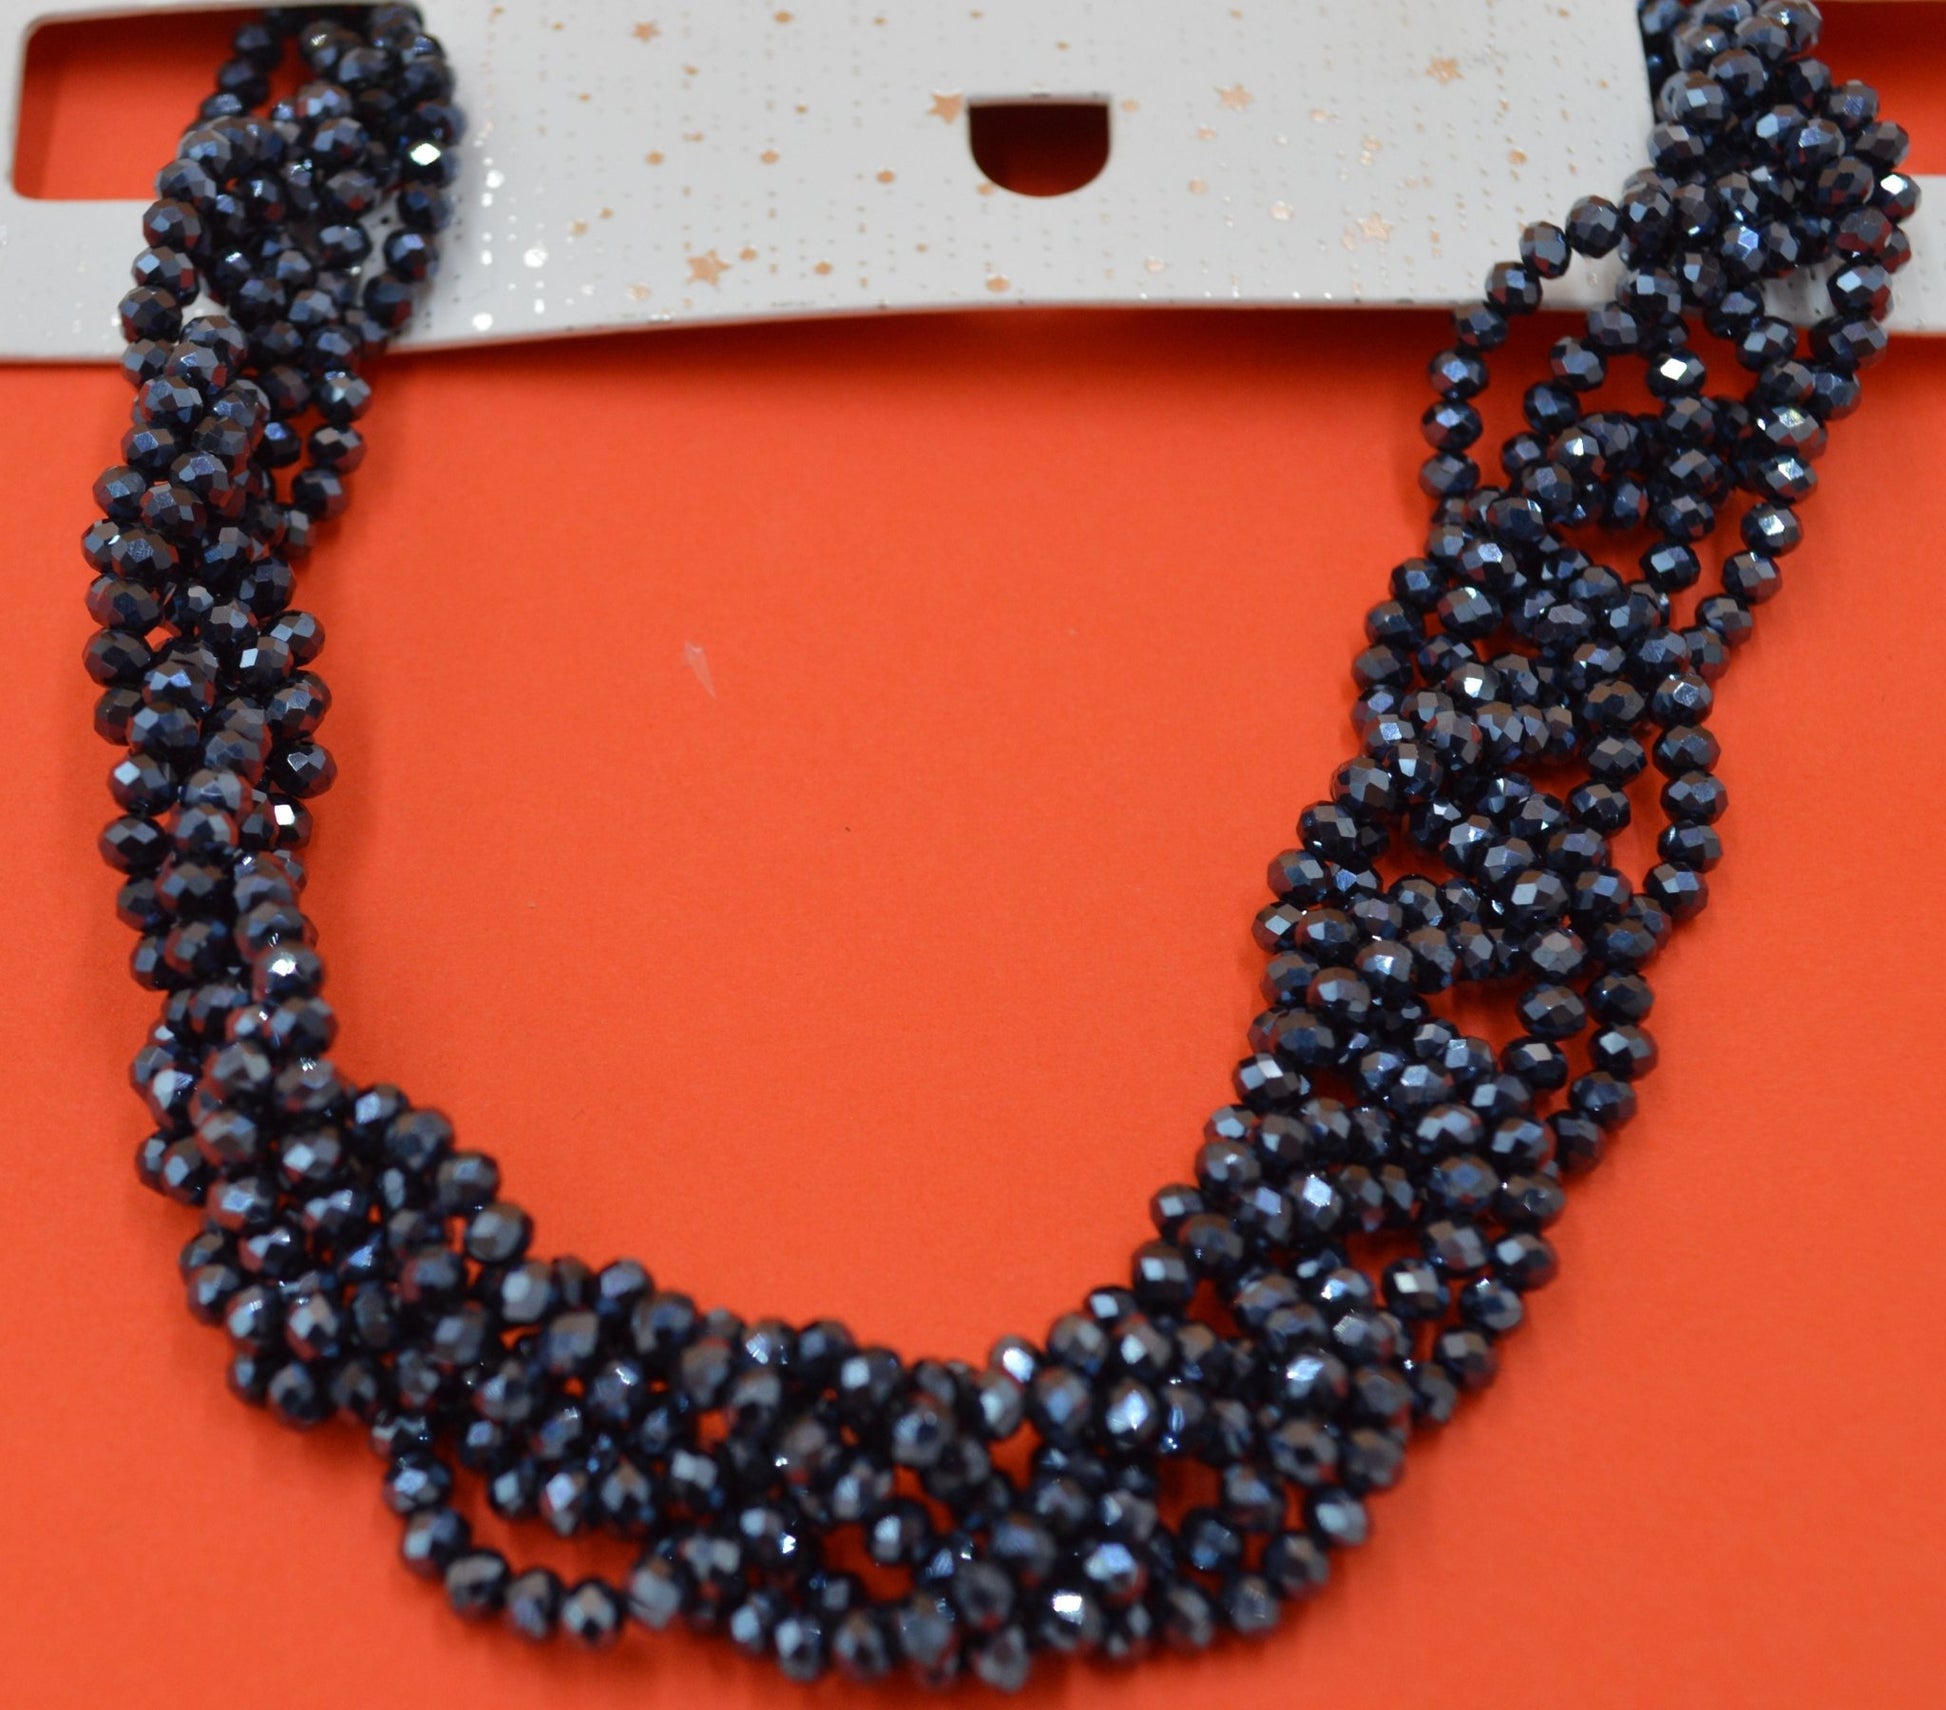 DOROTHY PERKINS TWISTED BEADS NECKLACE VERY DARK BLUE - TMD167207